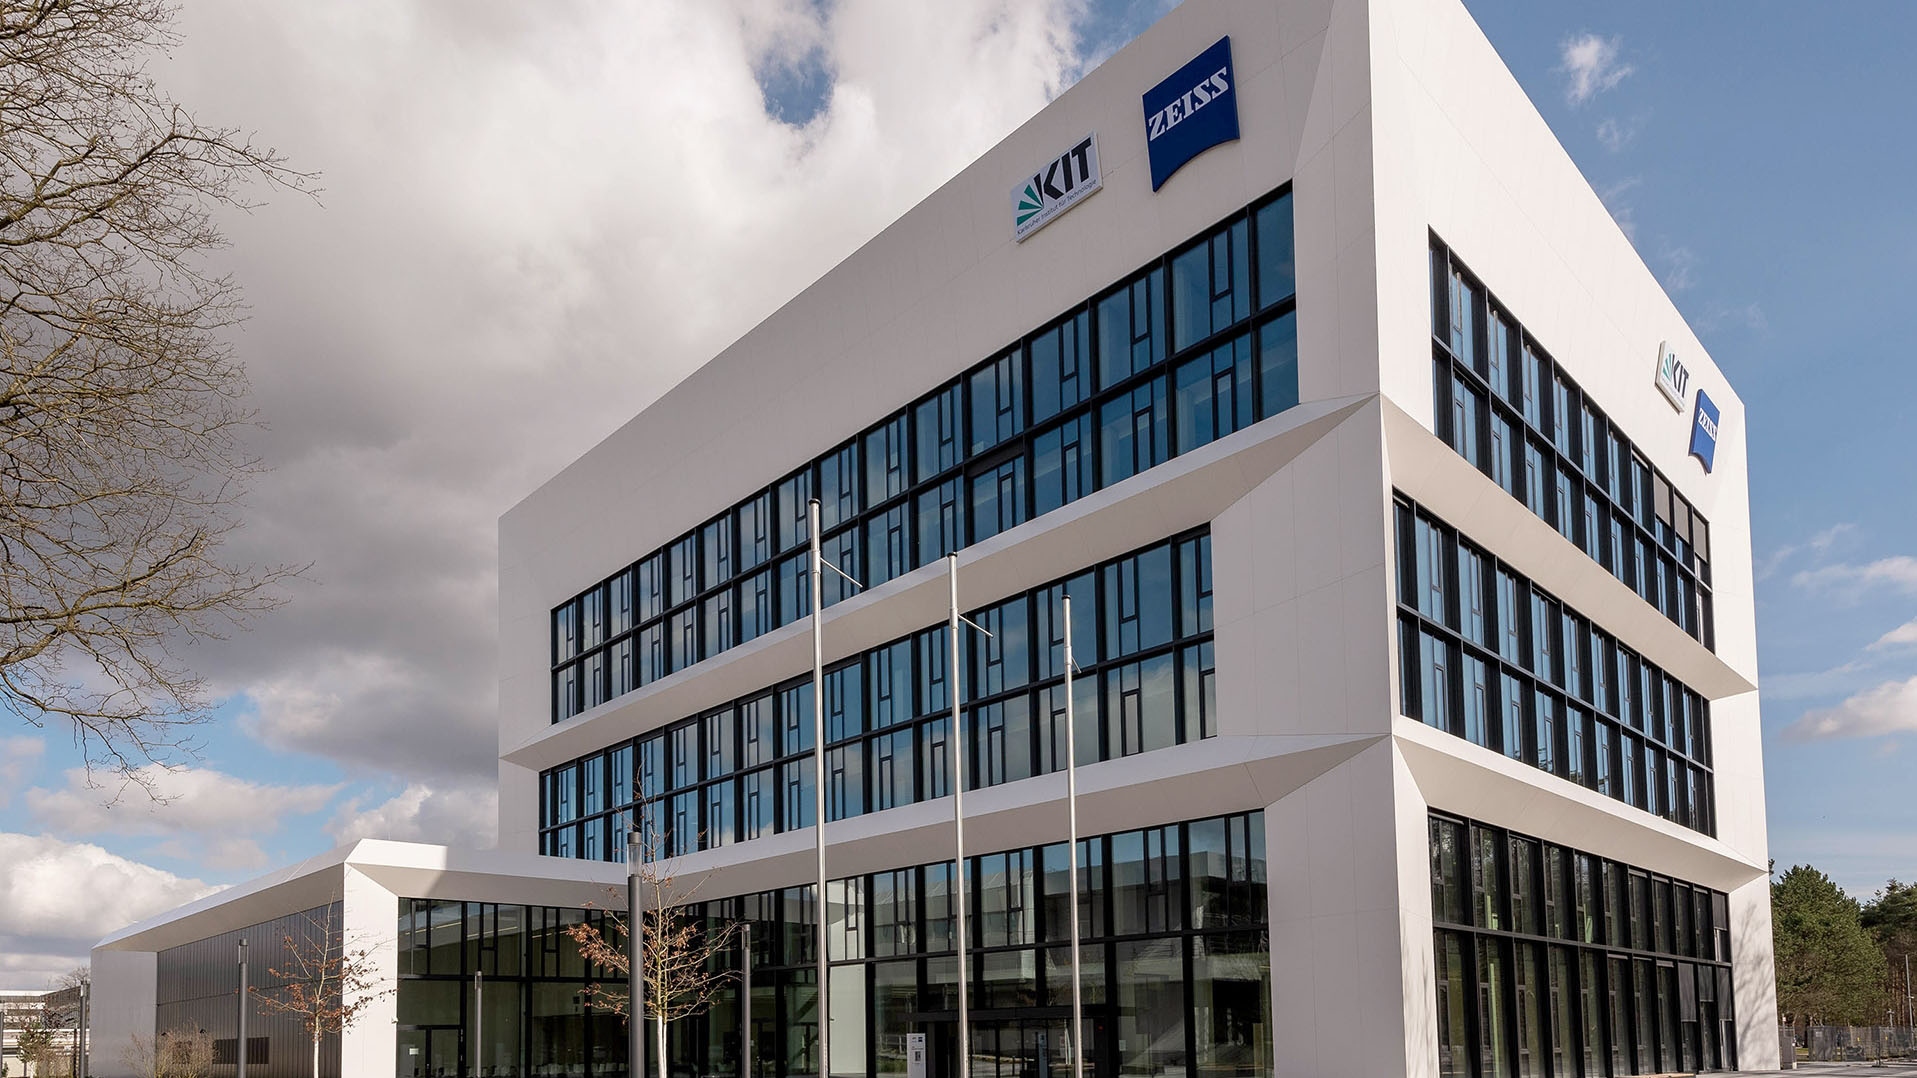 The ZEISS Innovation Hub @ KIT on the North Campus of the Karlsruhe Institute of Technology (KIT).